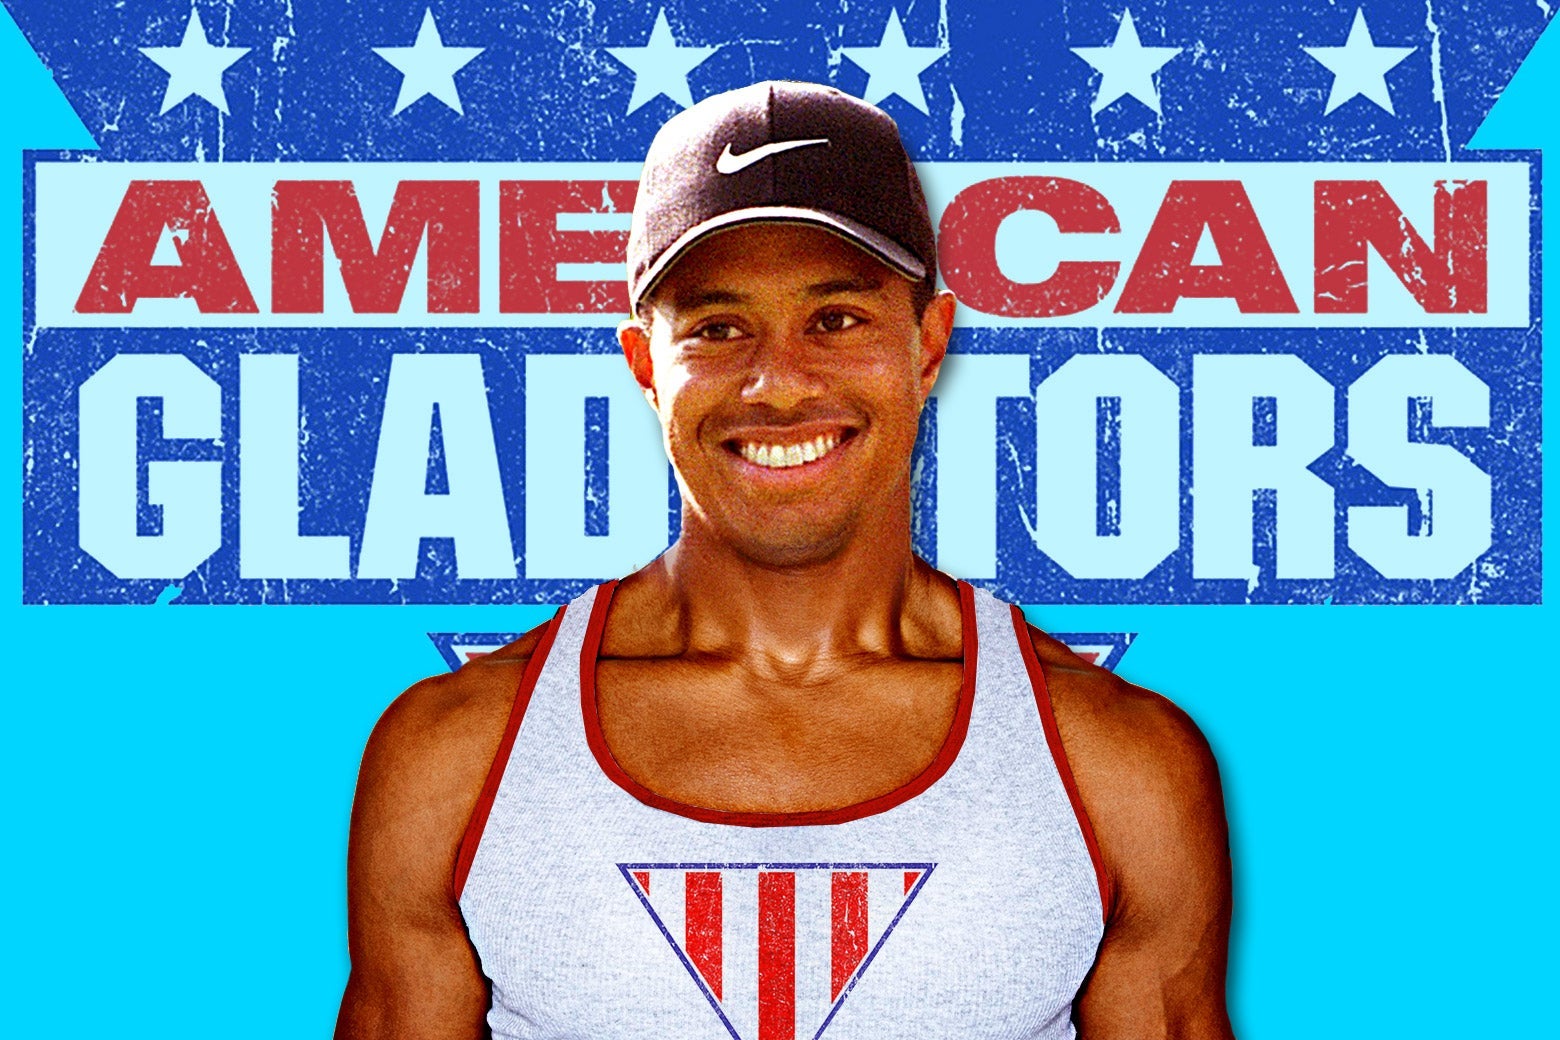 Tiger Woods in American Gladiators spandex, appearing in front of the show's logo